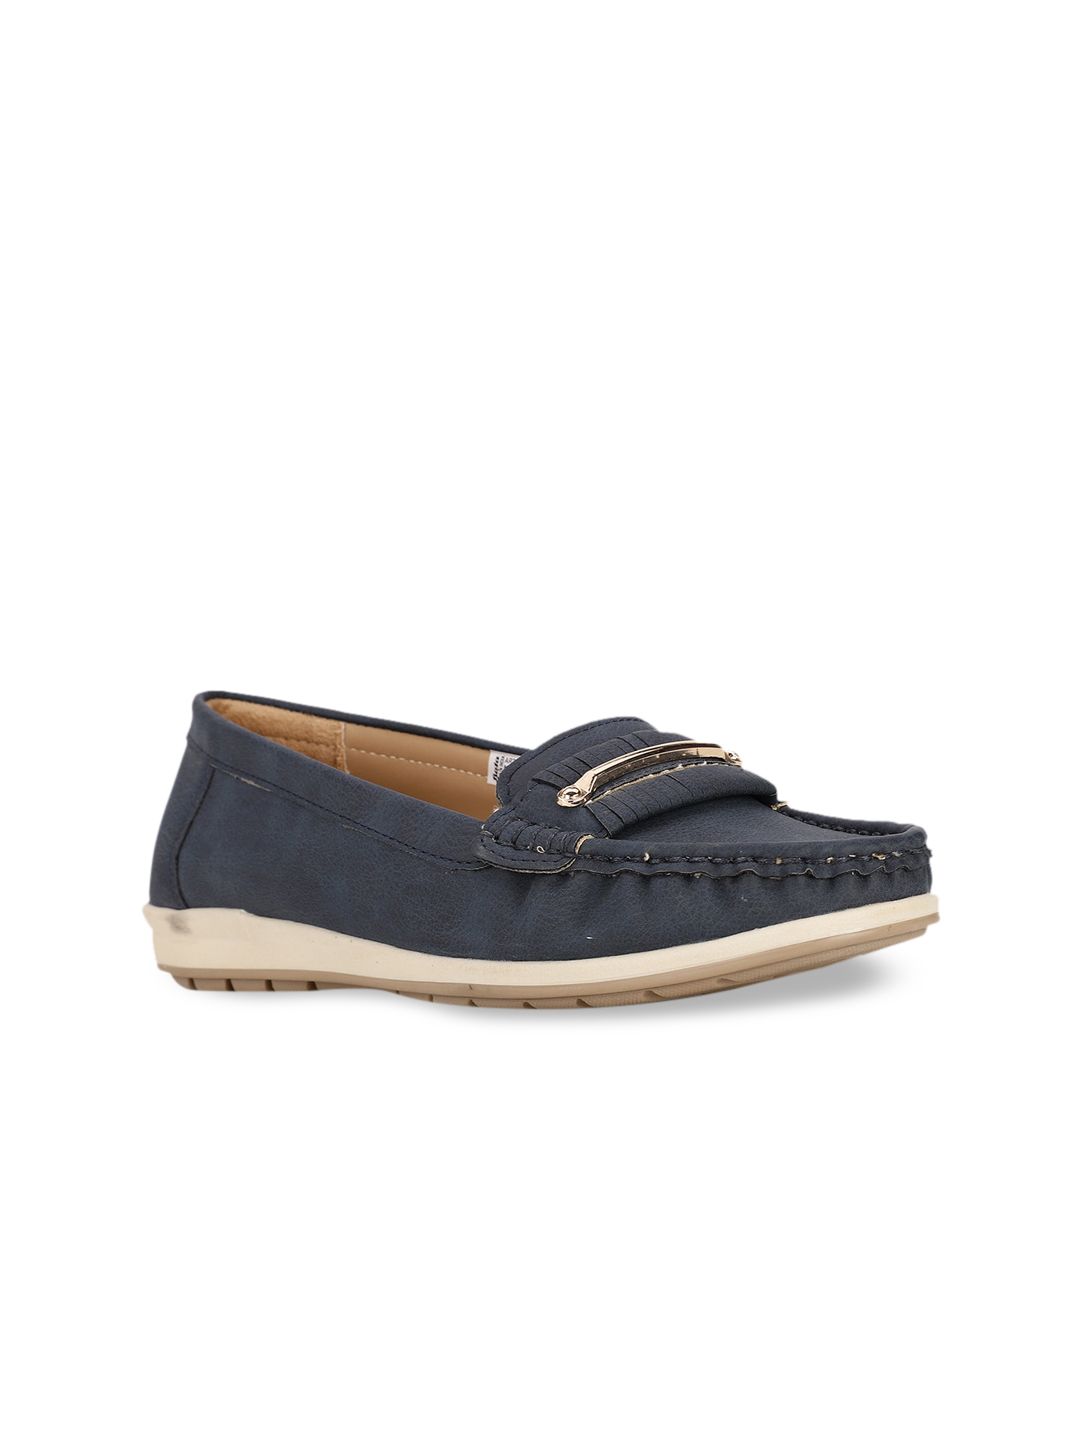 Bata Women Navy Blue Textured Loafers Price in India